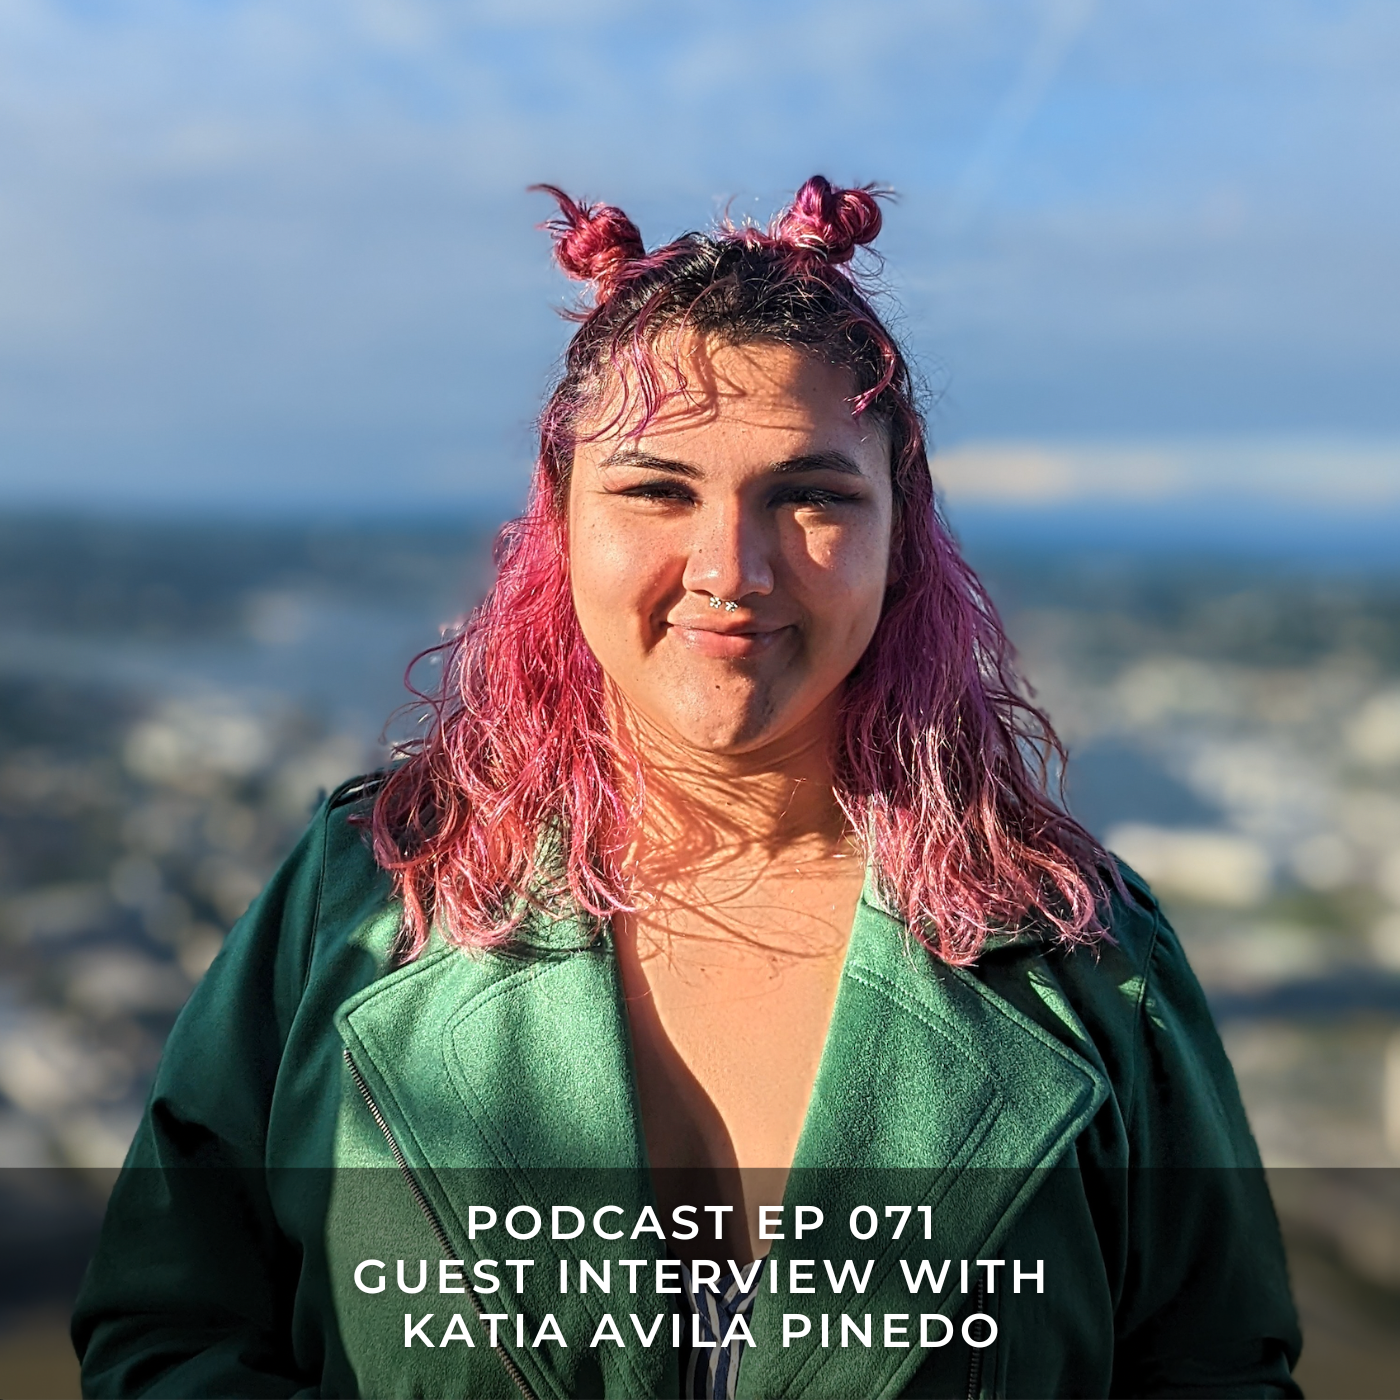 Guest Interview with Katia Avila Pinedo